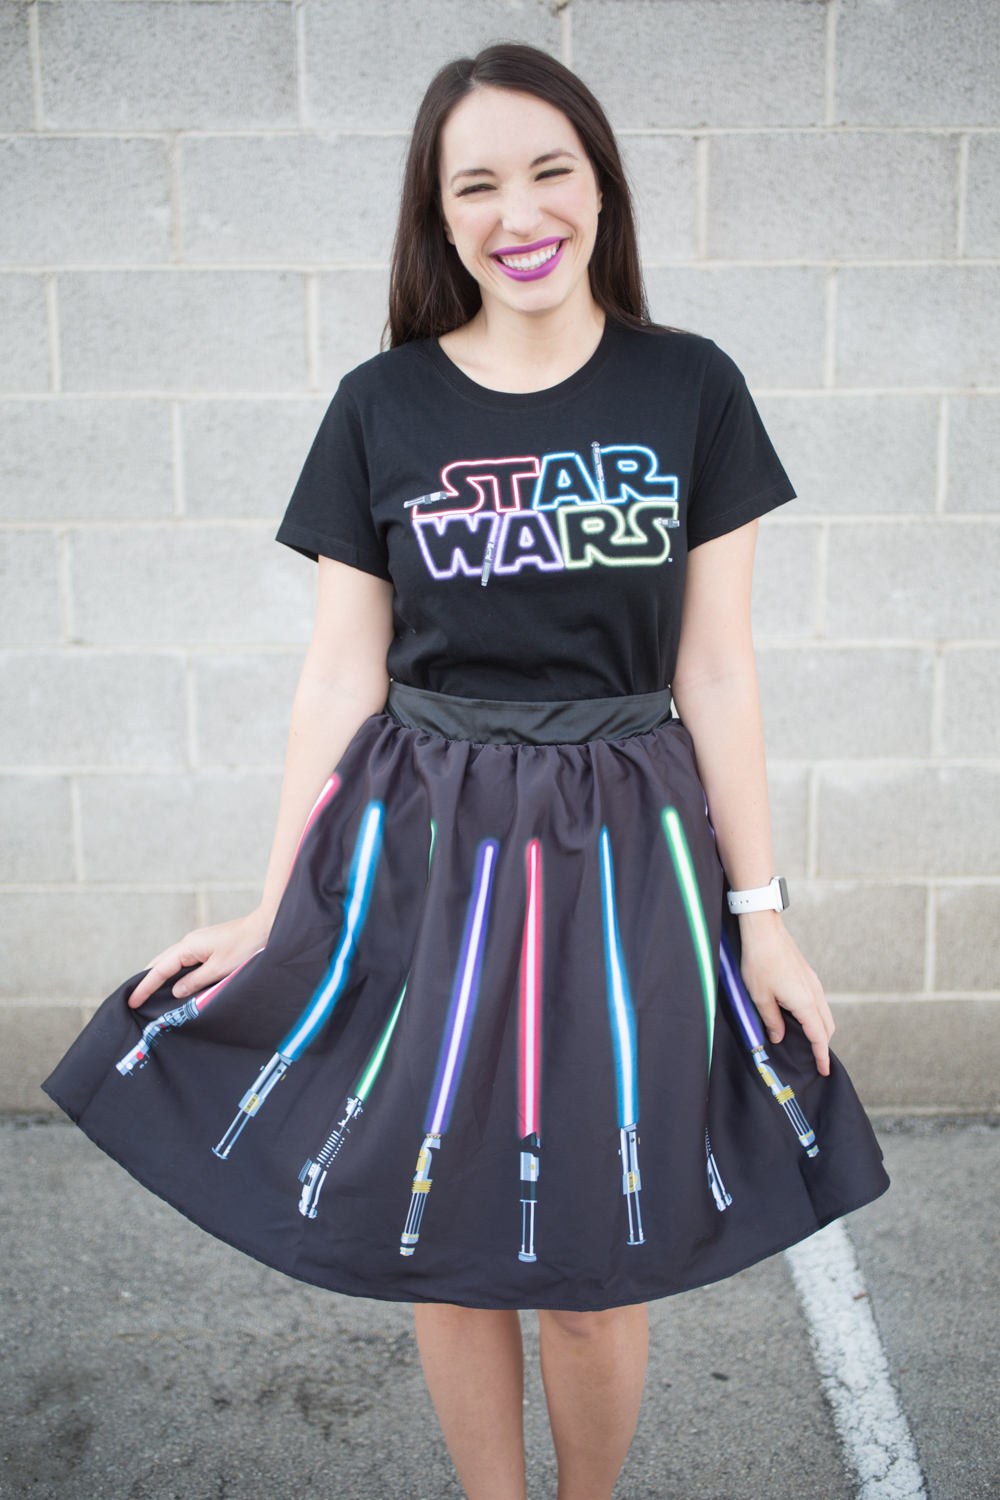 Her Universe Star Wars Light Saber Outfit